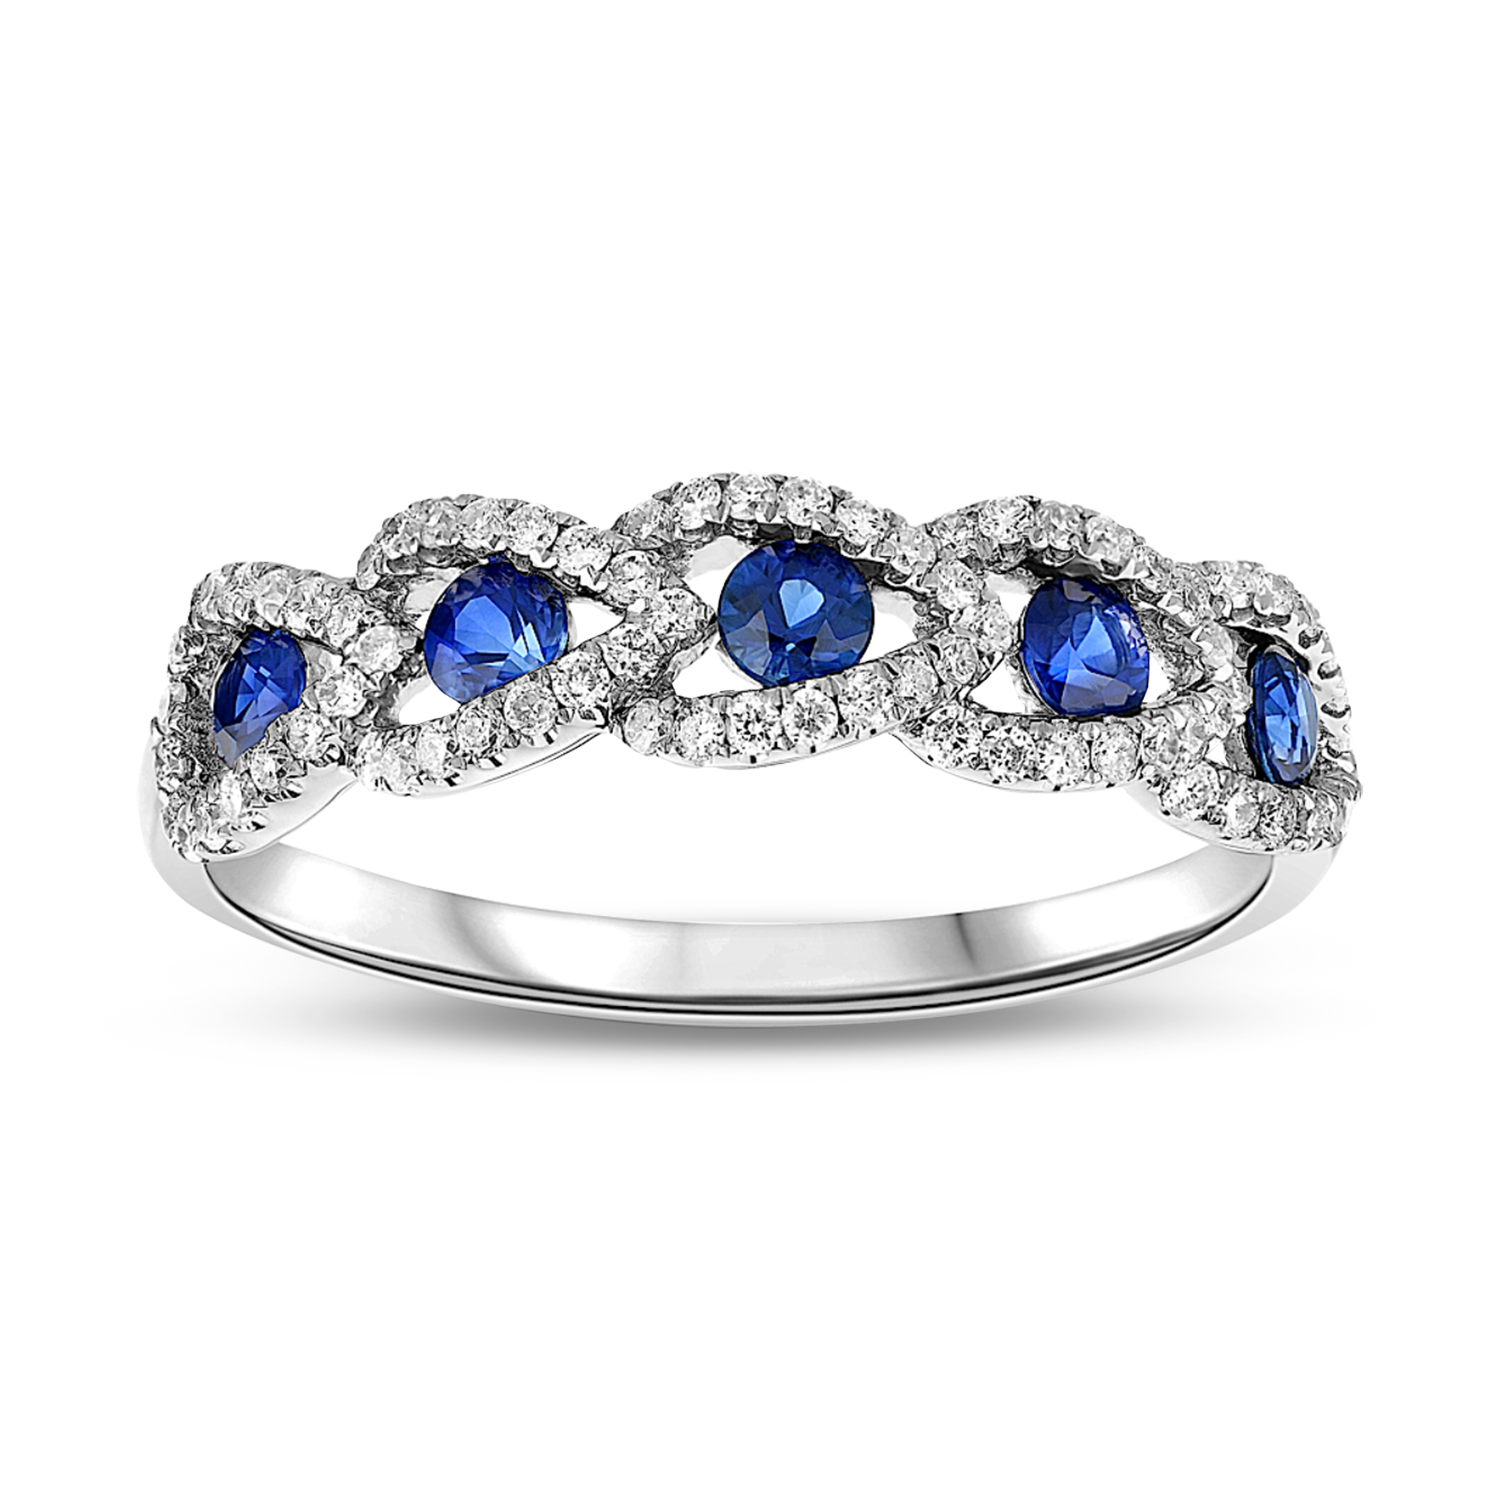 View 0.70ctw Diamond and Sapphire Wedding Band in 18k Gold